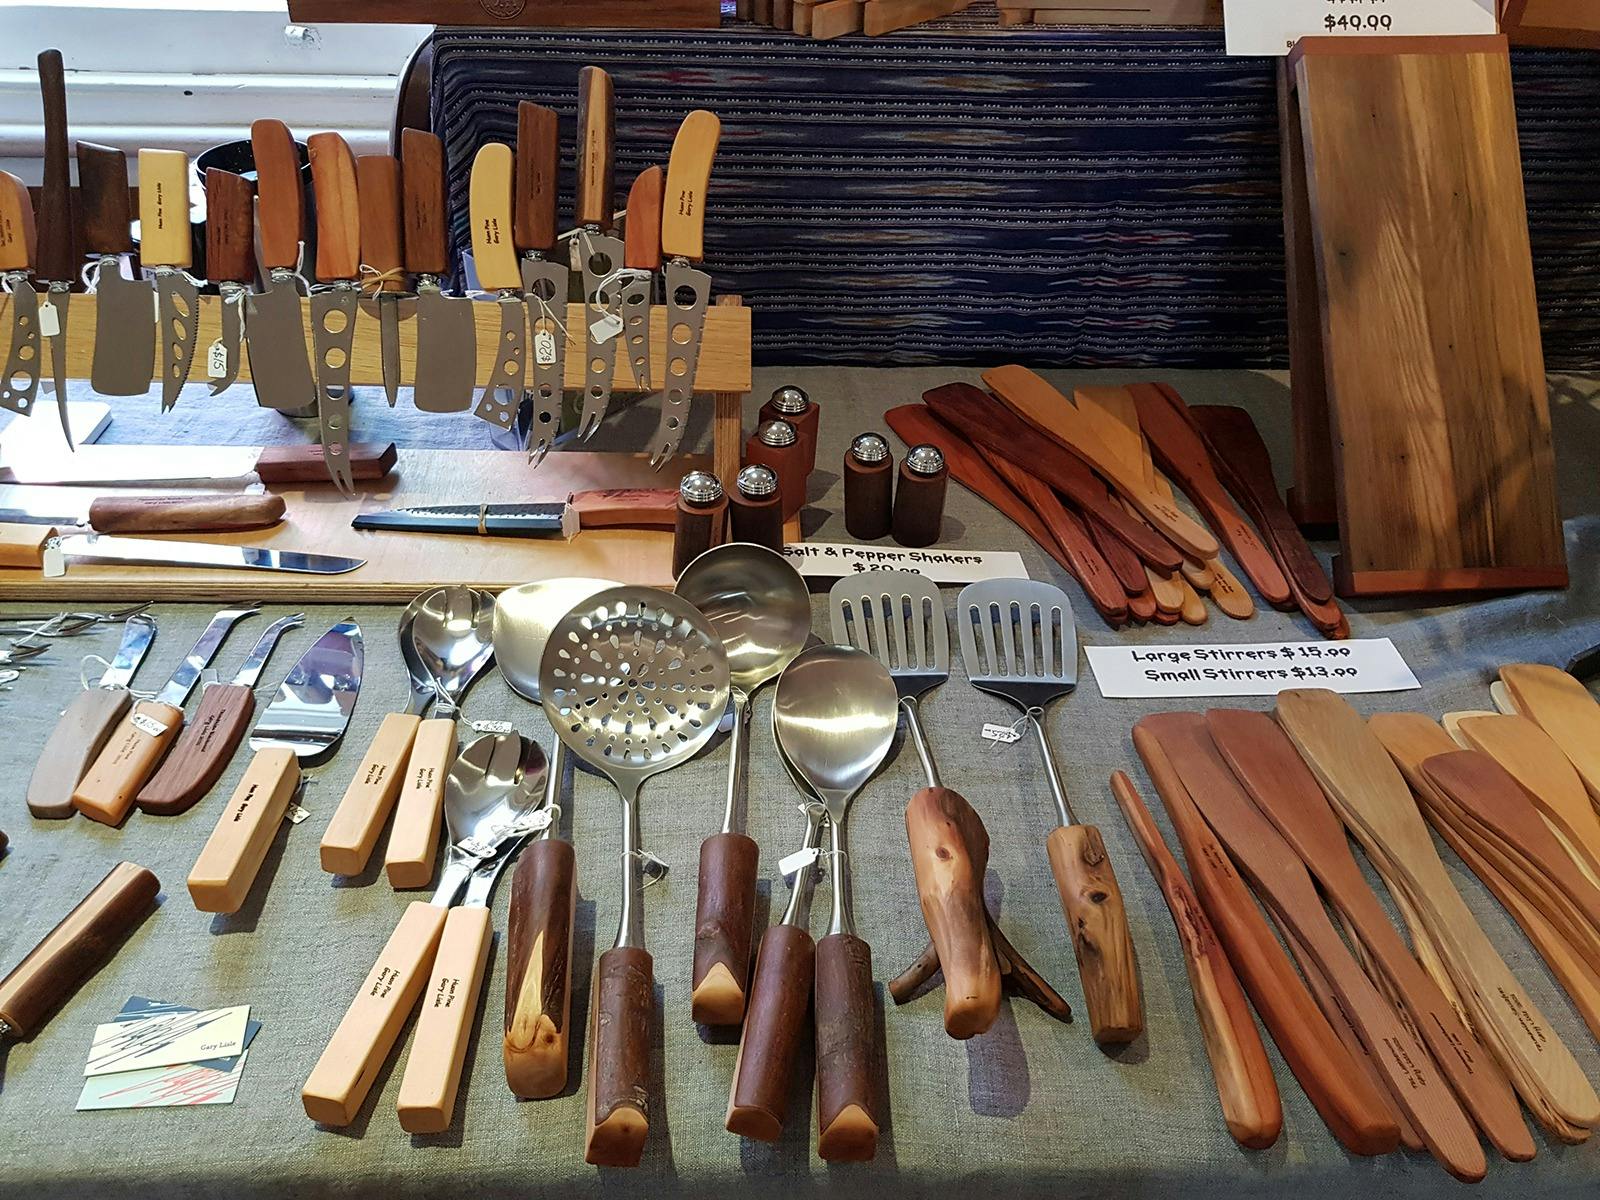 wooden handled knives and spoons, spatulas, cutting boards all from Tasmanian timbers